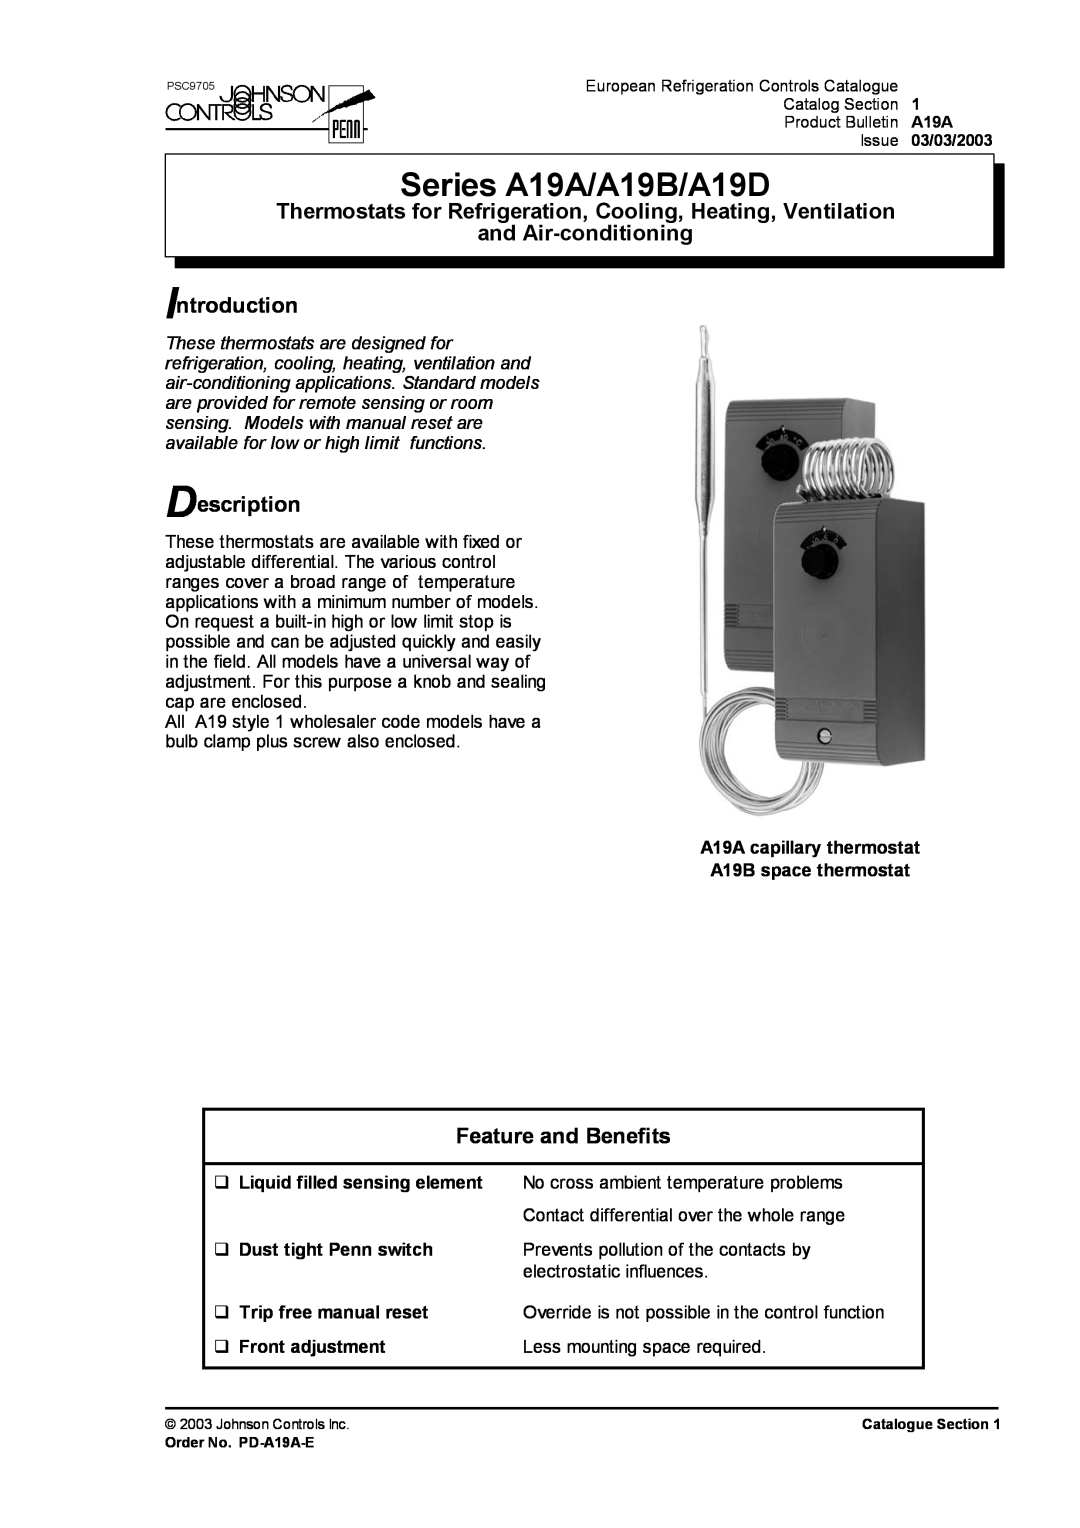 Johnson Controls manual and Air-conditioning Introduction, Description, Feature and Benefits, Series A19A/A19B/A19D 